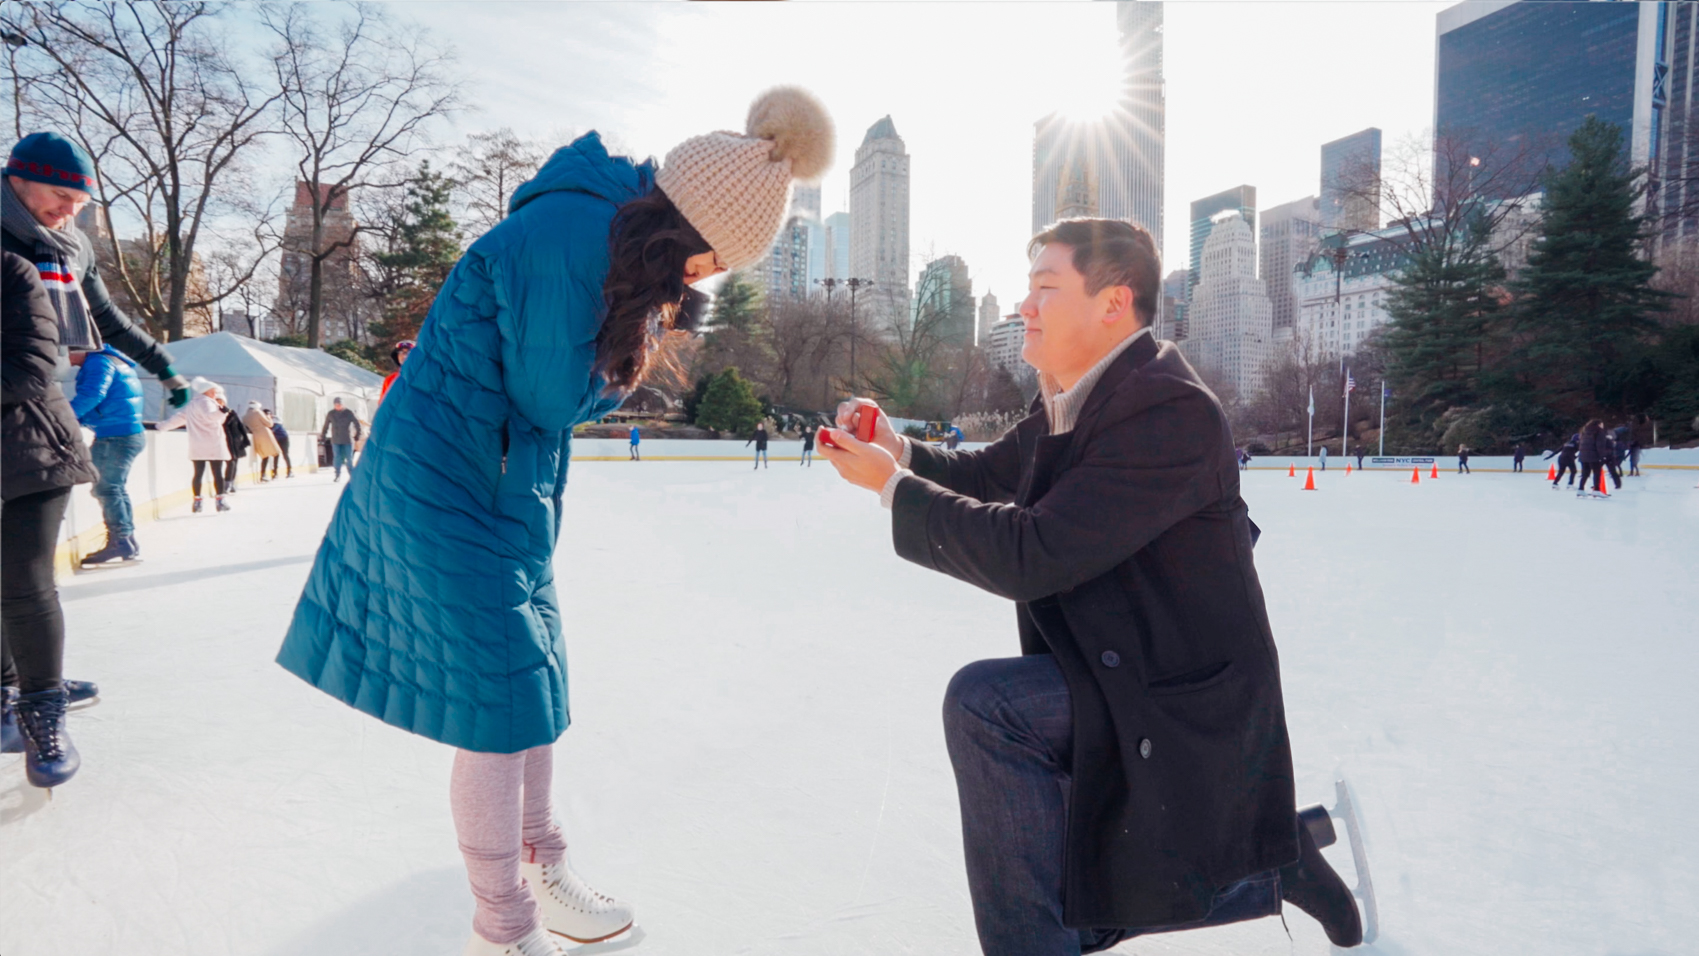 Emotional surprise proposal idea while ice skating at Wollman rink in central park